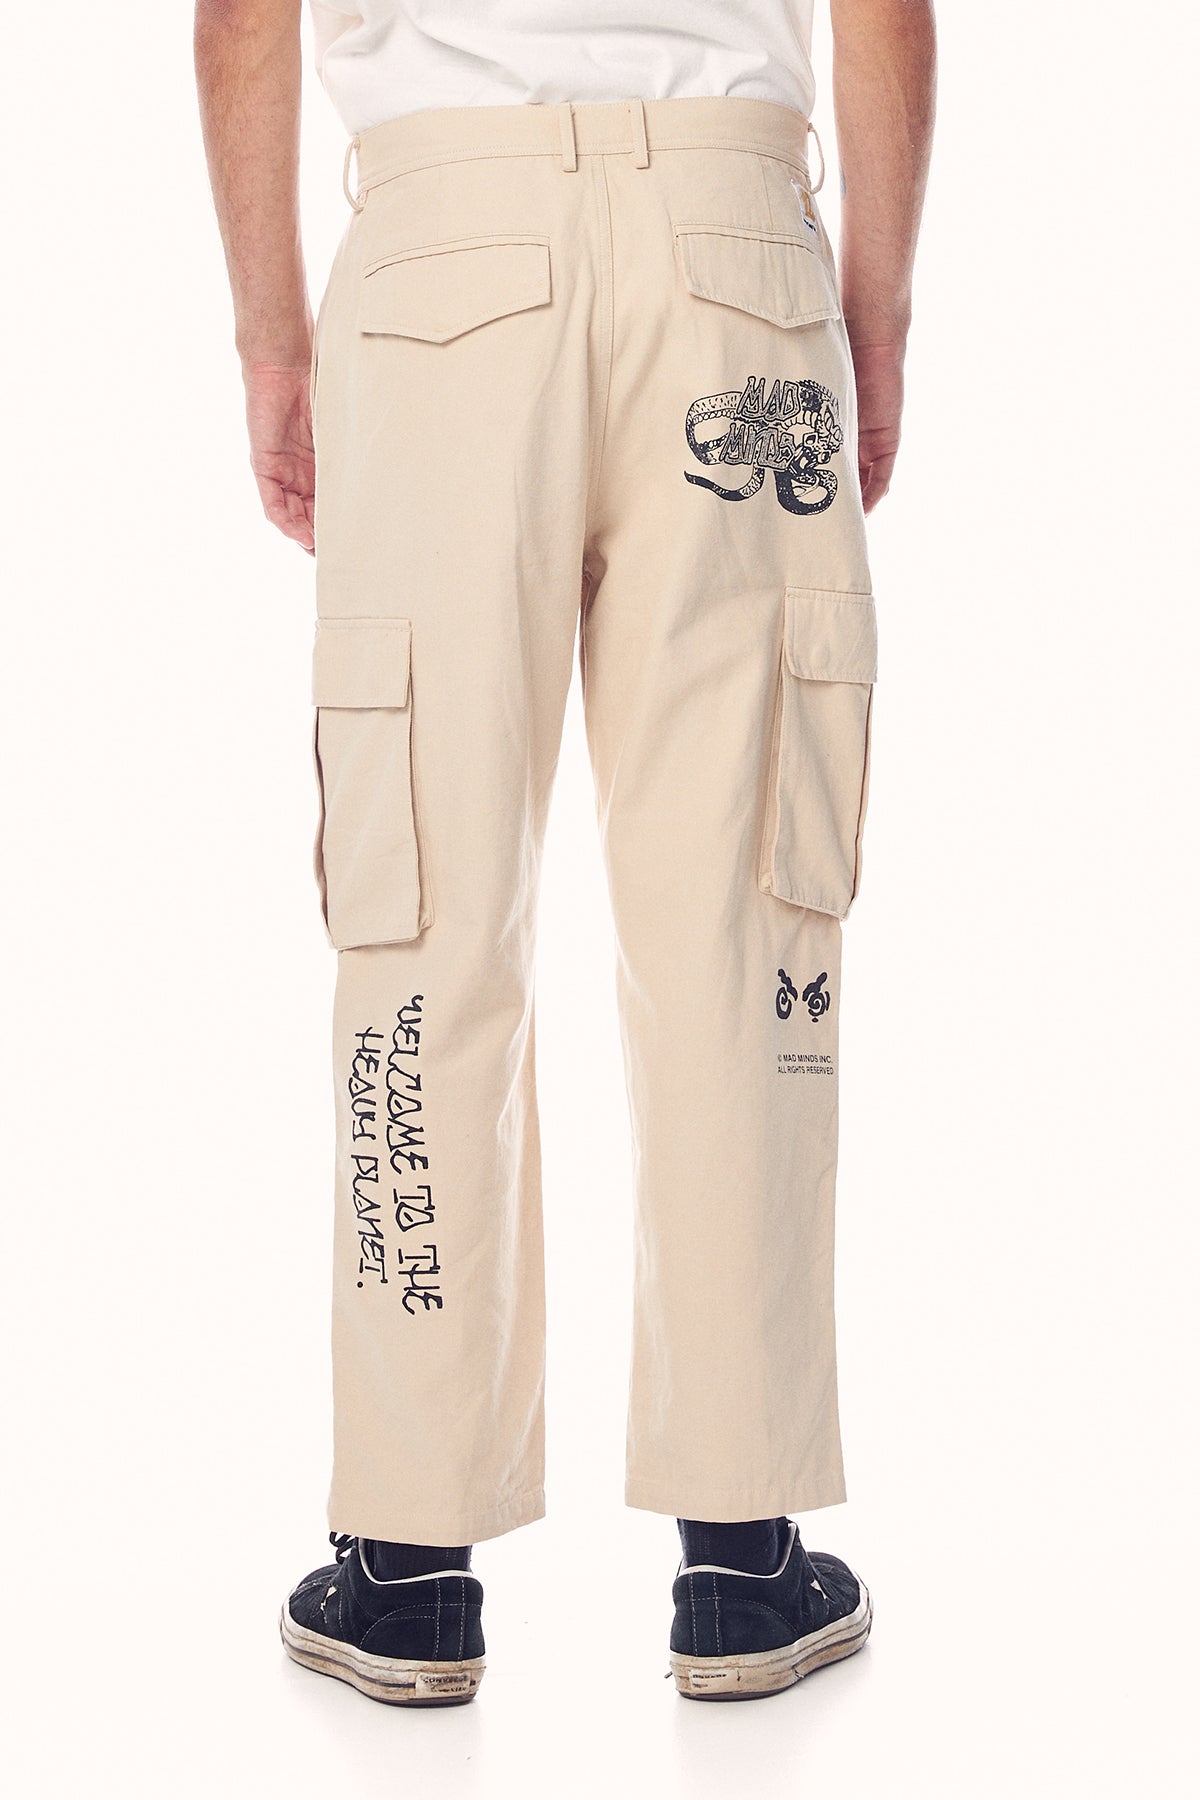 GREEN ONIONS CARGO PANT - Off White